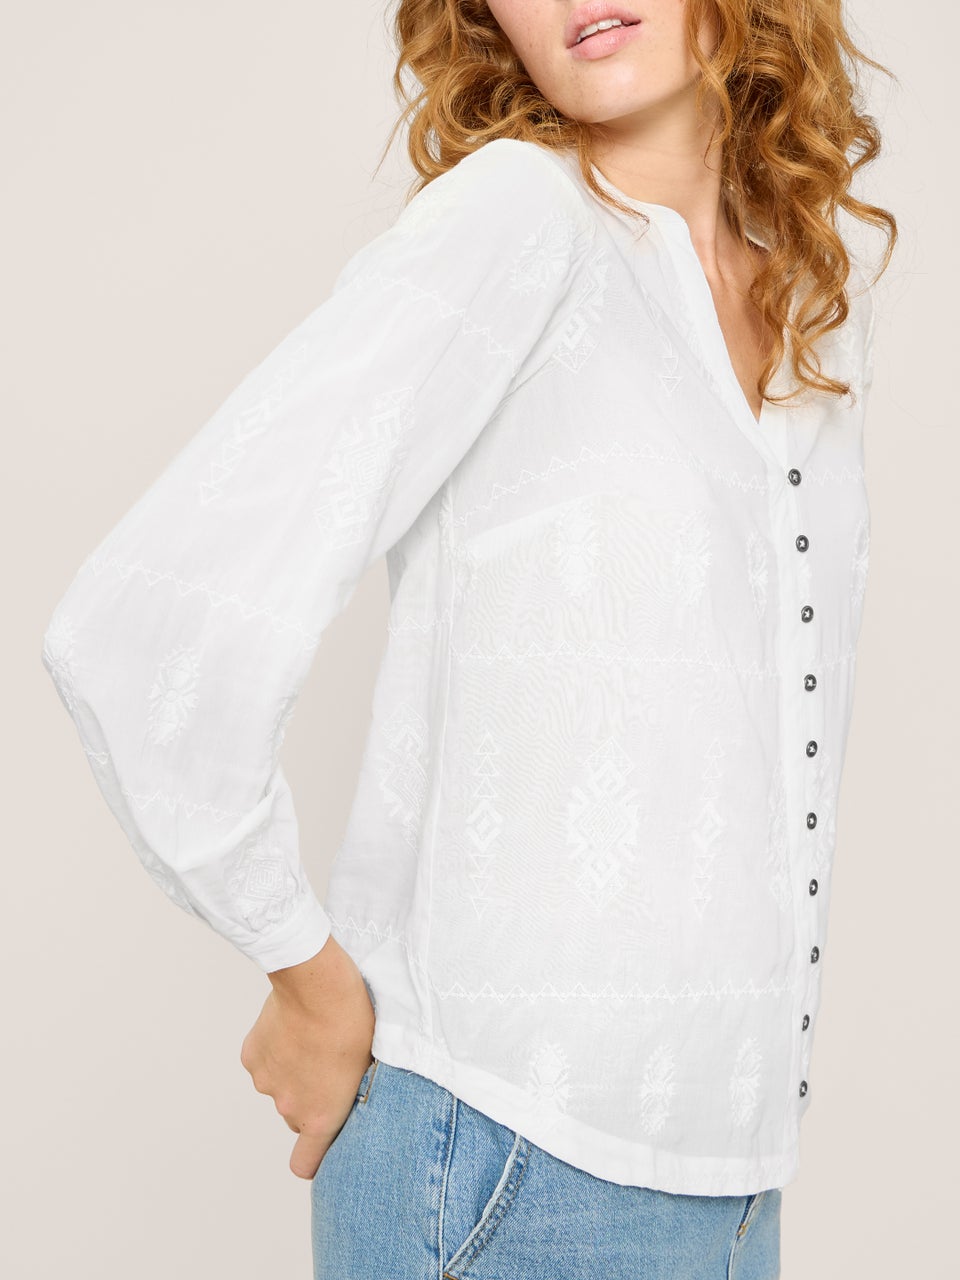 Kate Bestickte Bluse